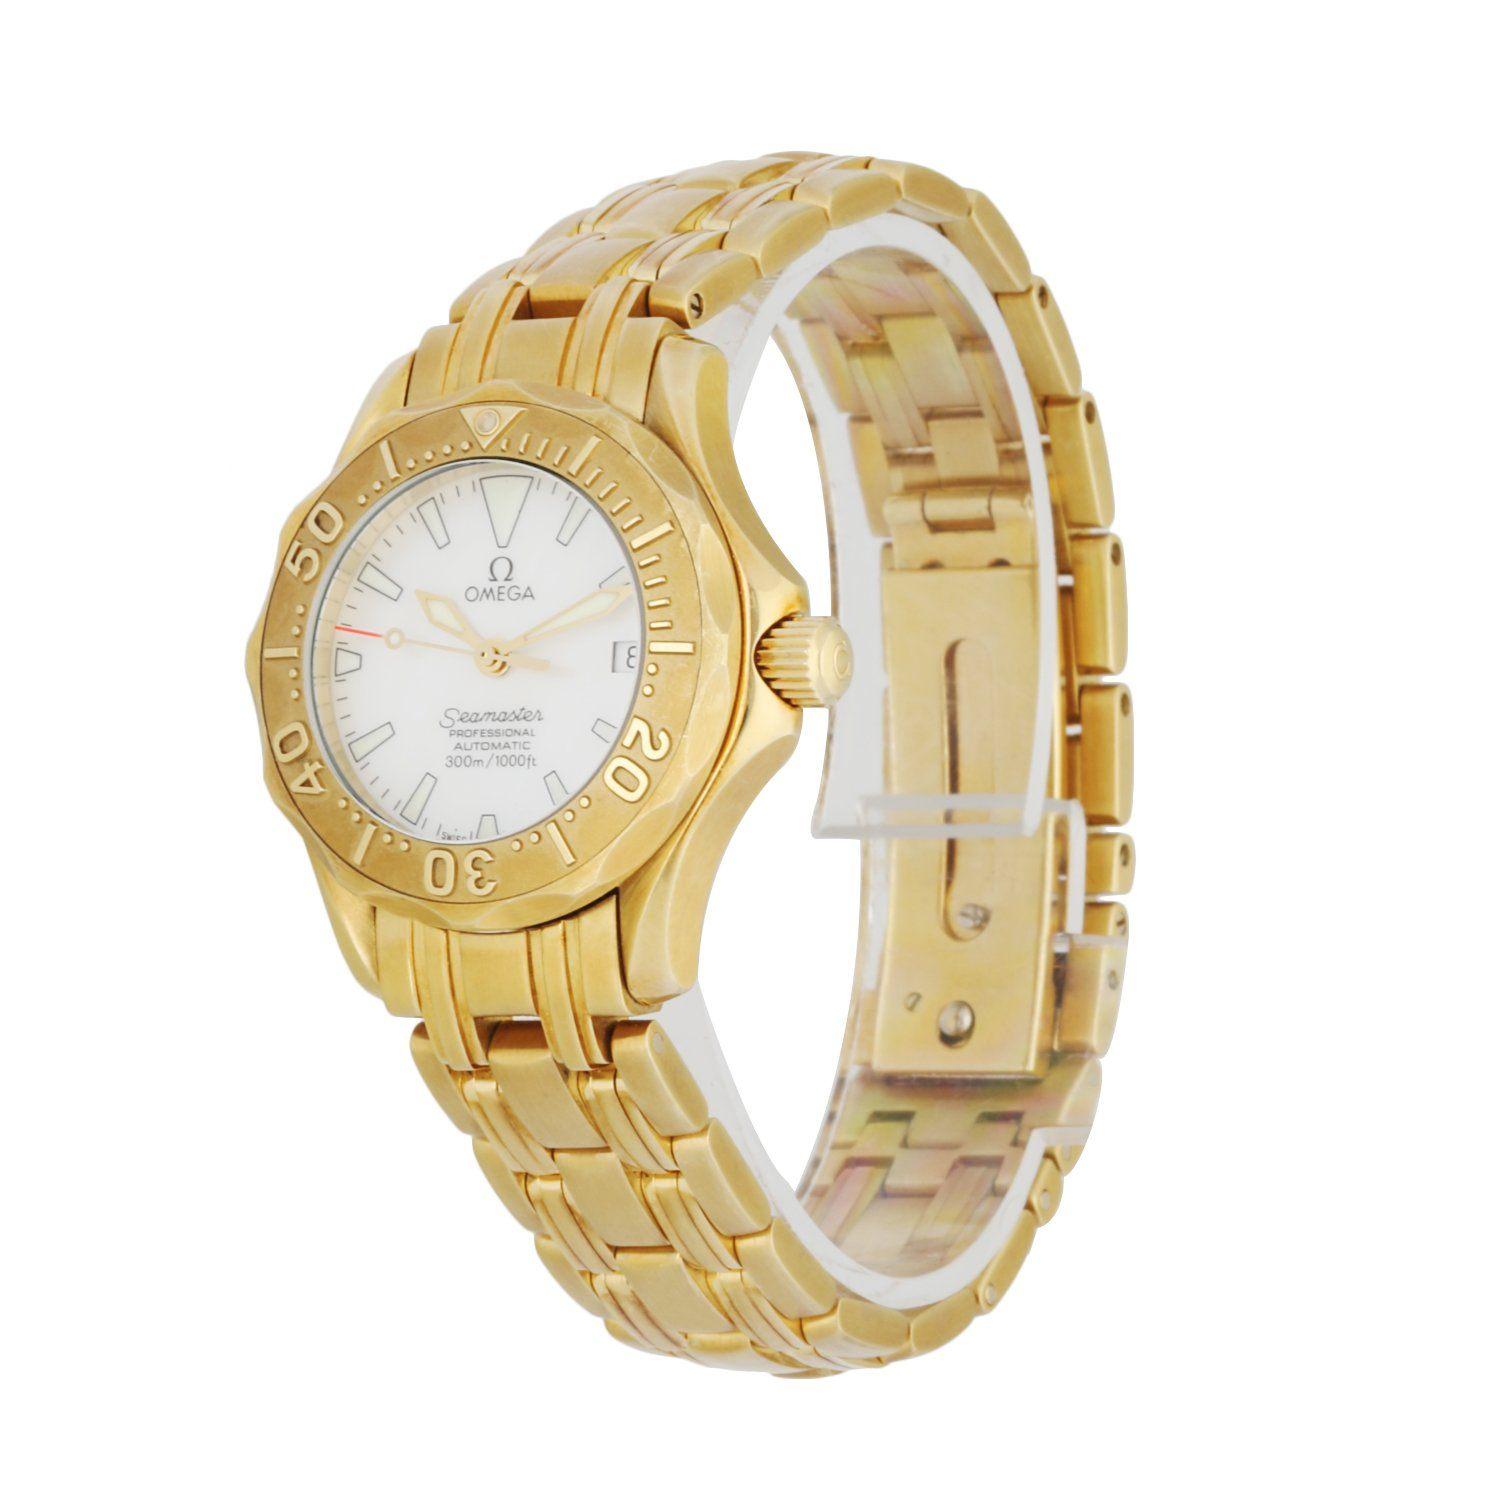 Omega Seamaster ladies watch. 28MM 18K yellow gold case with unidirectional 18K yellow gold bezel with golden bezel insert. Mother of pearl dial with luminous gold hands and luminous index hour marker. Date display at 3 o'clock position. 18K yellow